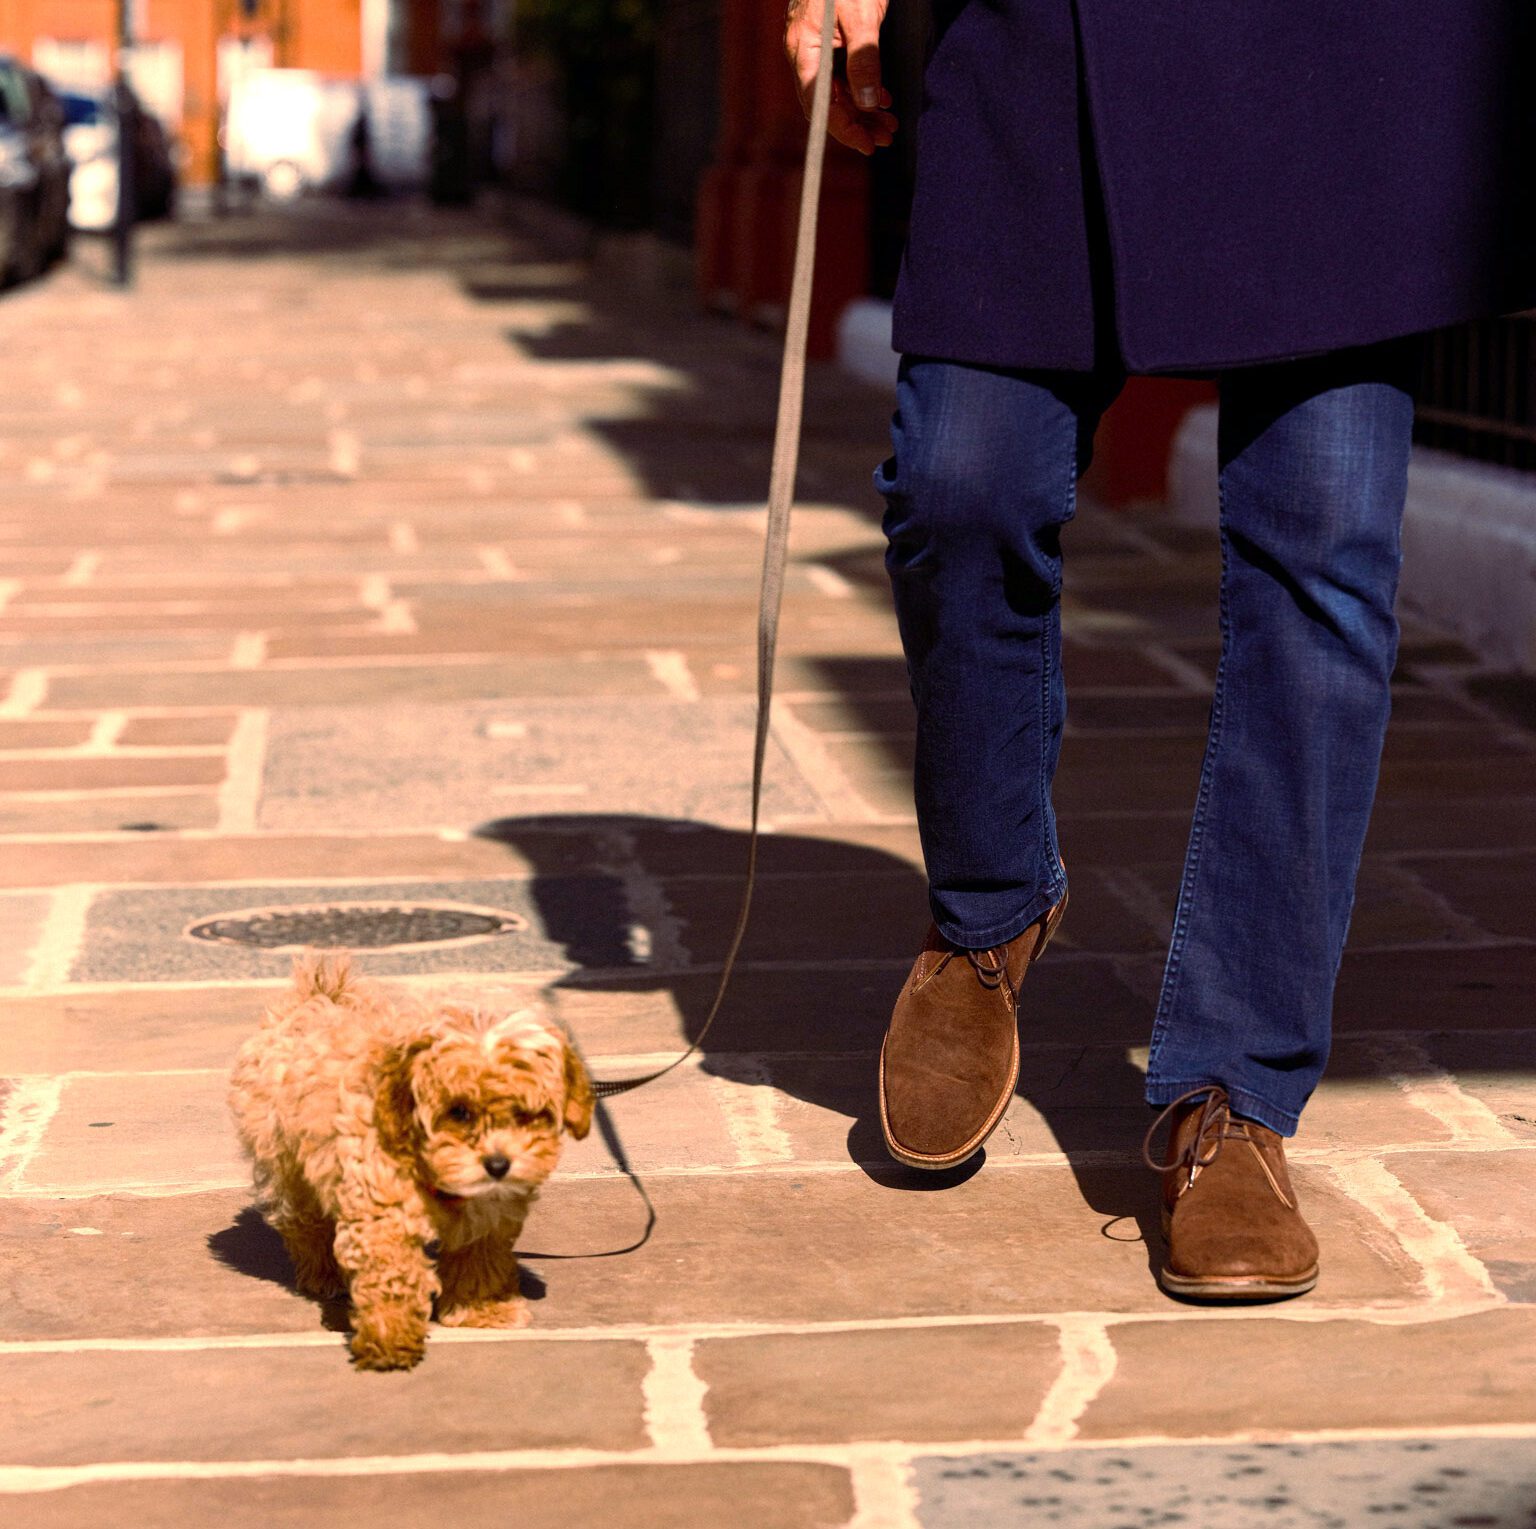 A small fluffy dog walks down the pavement alongside a man wearing loafers and jeans.